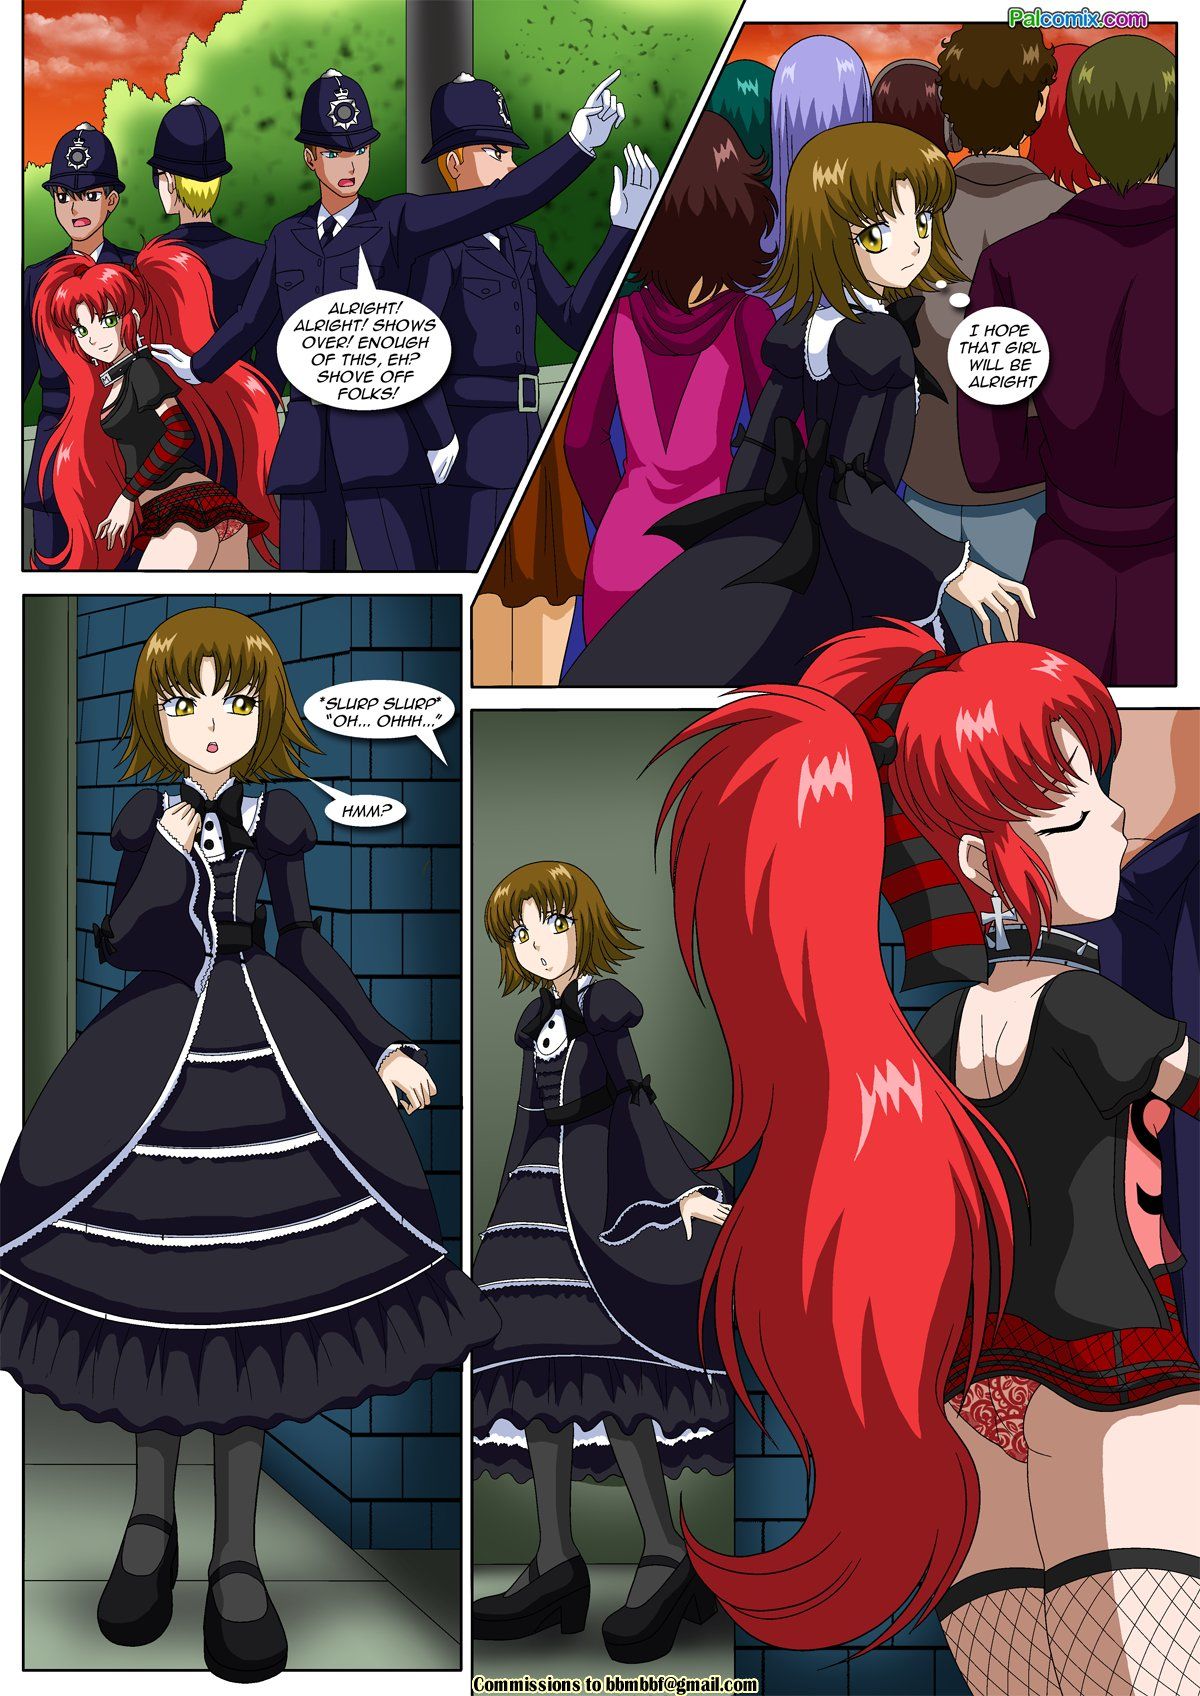 The Carnal Kingdom 6 - Angels and Demons page 29